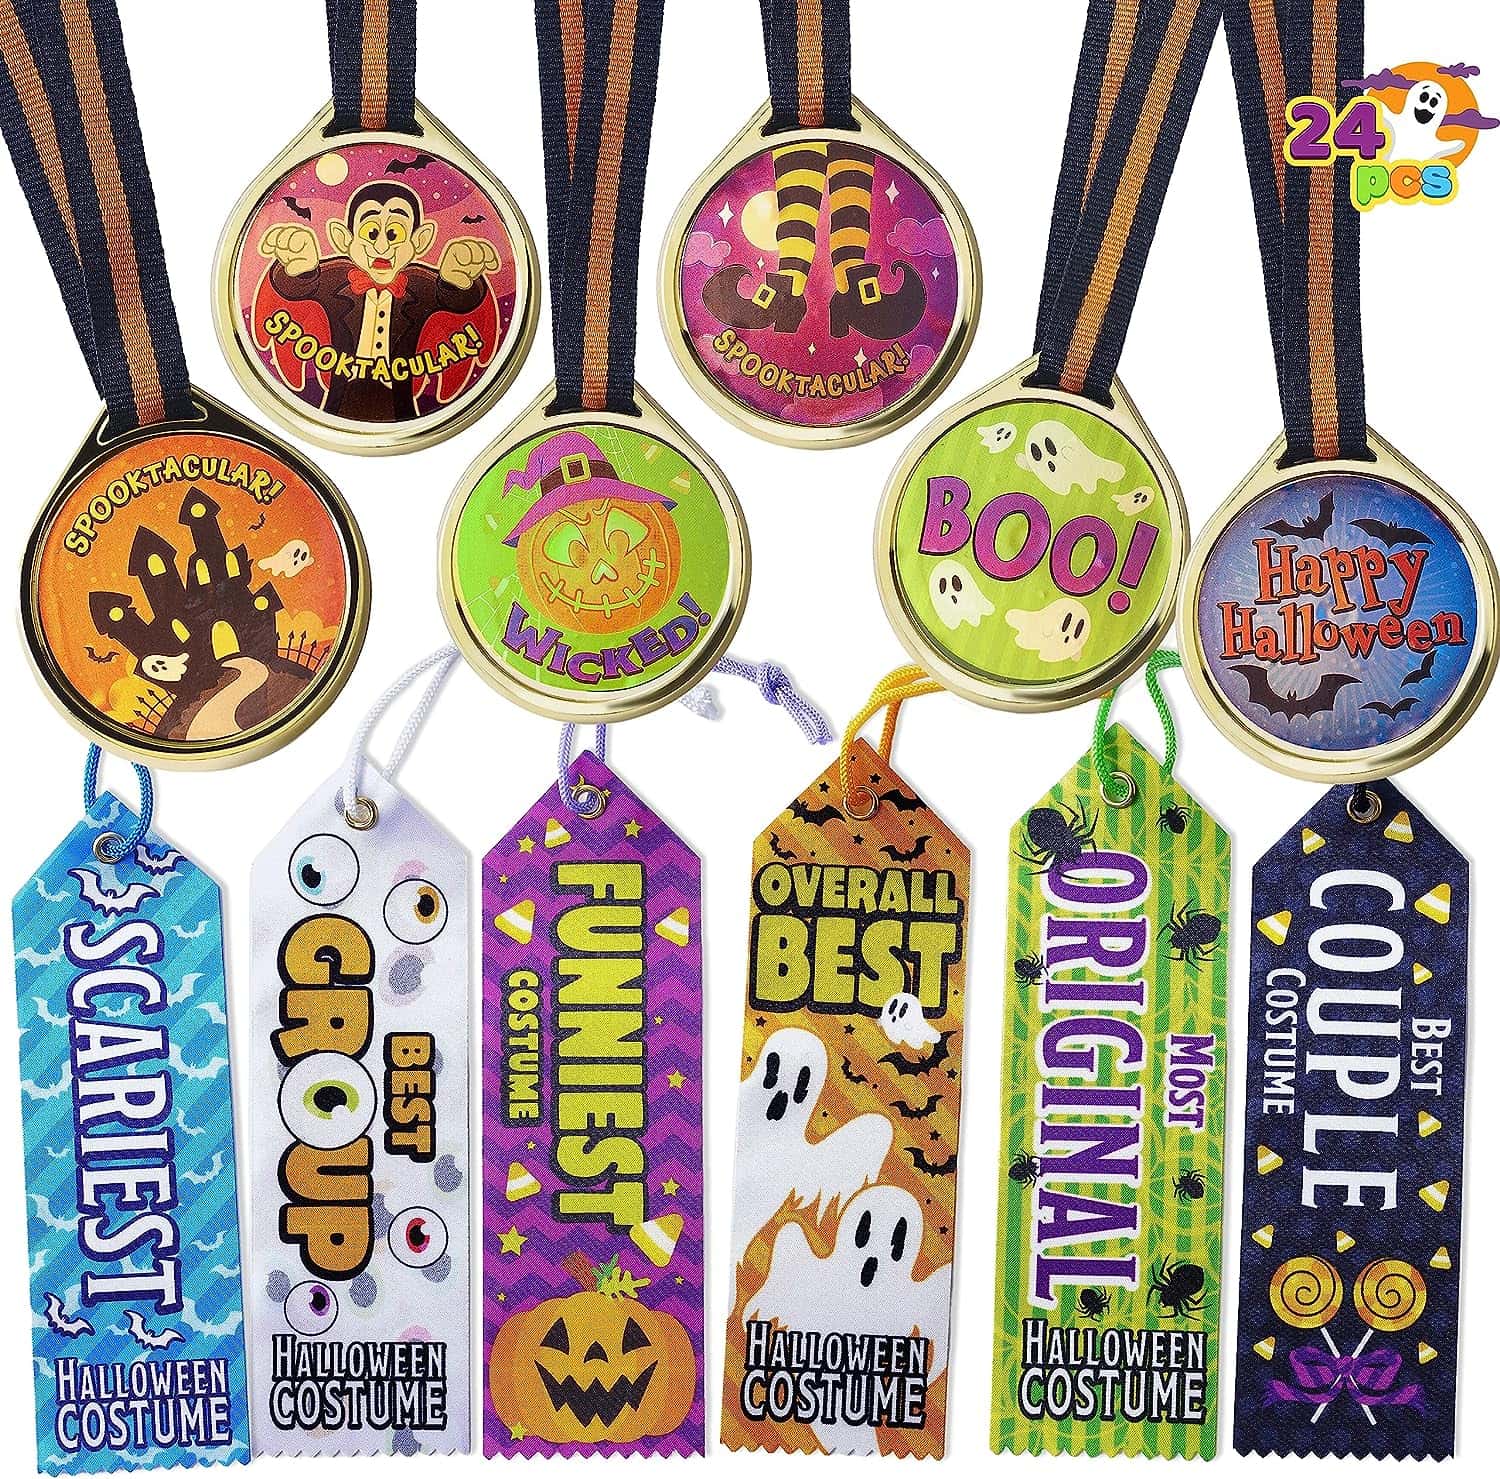 24 PCS Halloween Medal Trophies and Trophy Ribbons for Halloween Award